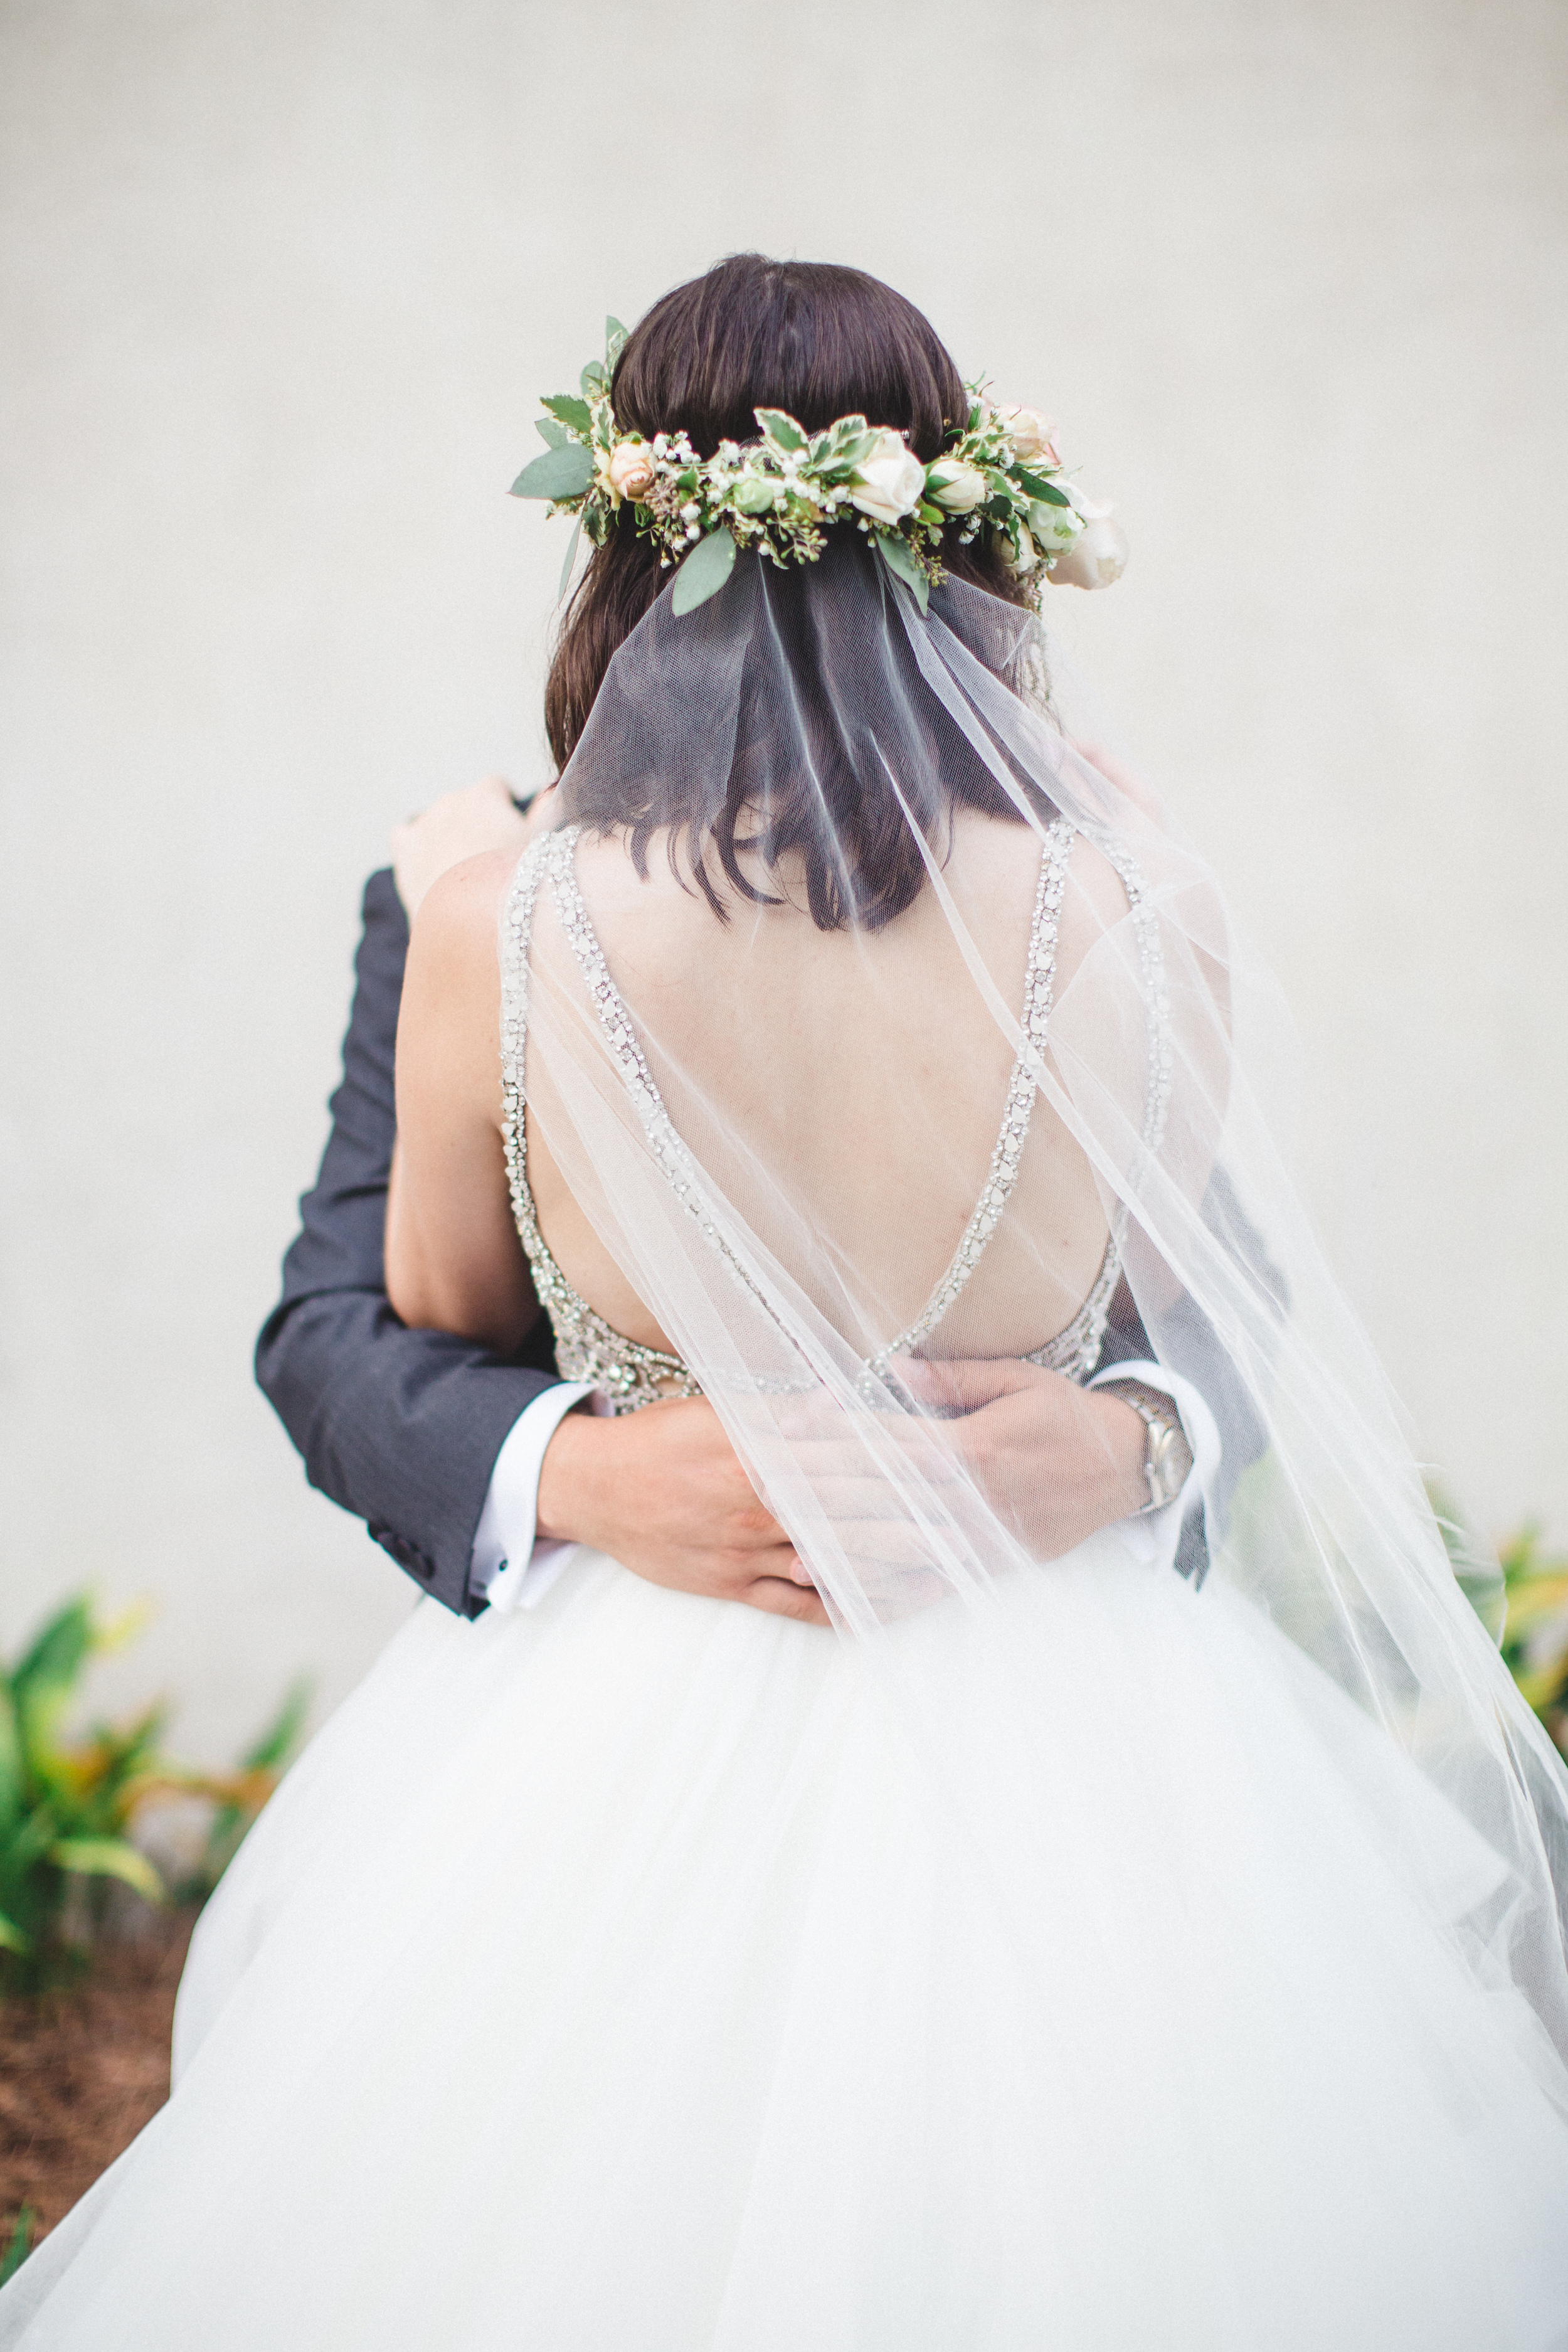 daniela-and-pedro-wedding-izzy-hudgins-photography-a-to-zinnias-whitfield-square-charles-h-morris-center-wedding-ivoyy-and-beau-bridal-boutique-dorie-hayley-paige-savannah-wedding-planner-savannah-bridal-boutique-savannah-weddings-36.jpg